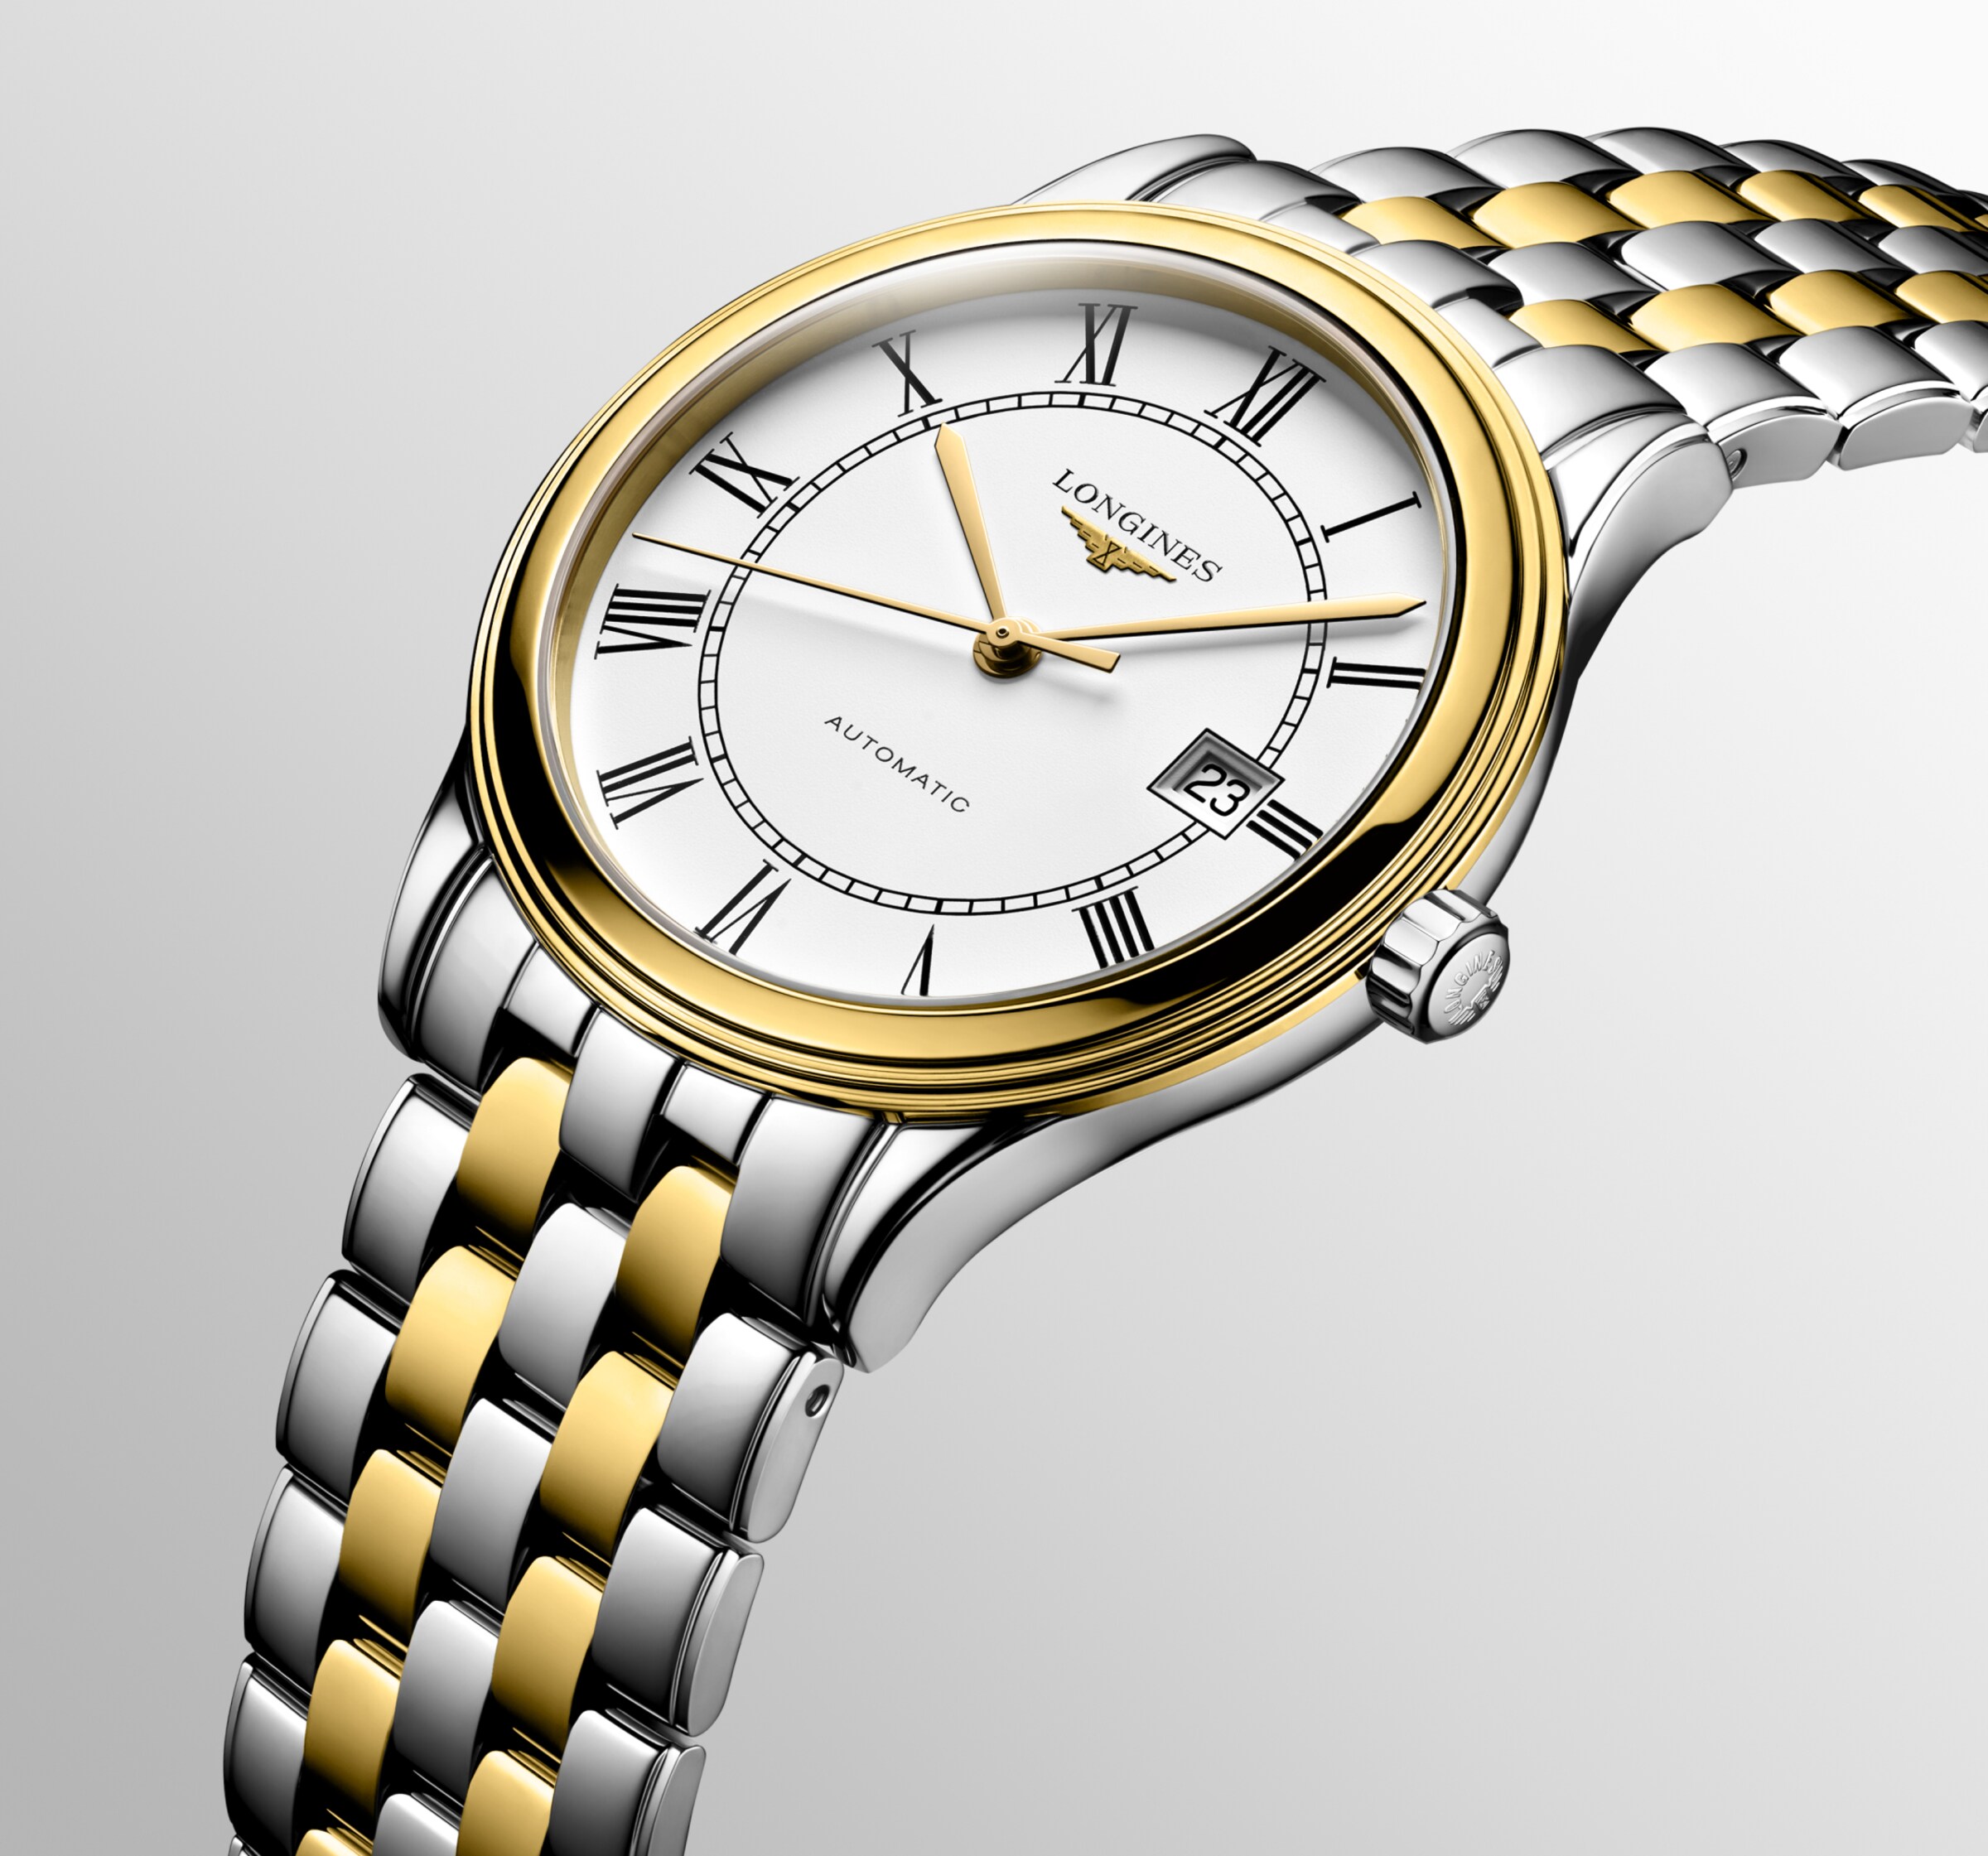 Longines FLAGSHIP Automatic Stainless steel and yellow PVD coating Watch - L4.984.3.21.7